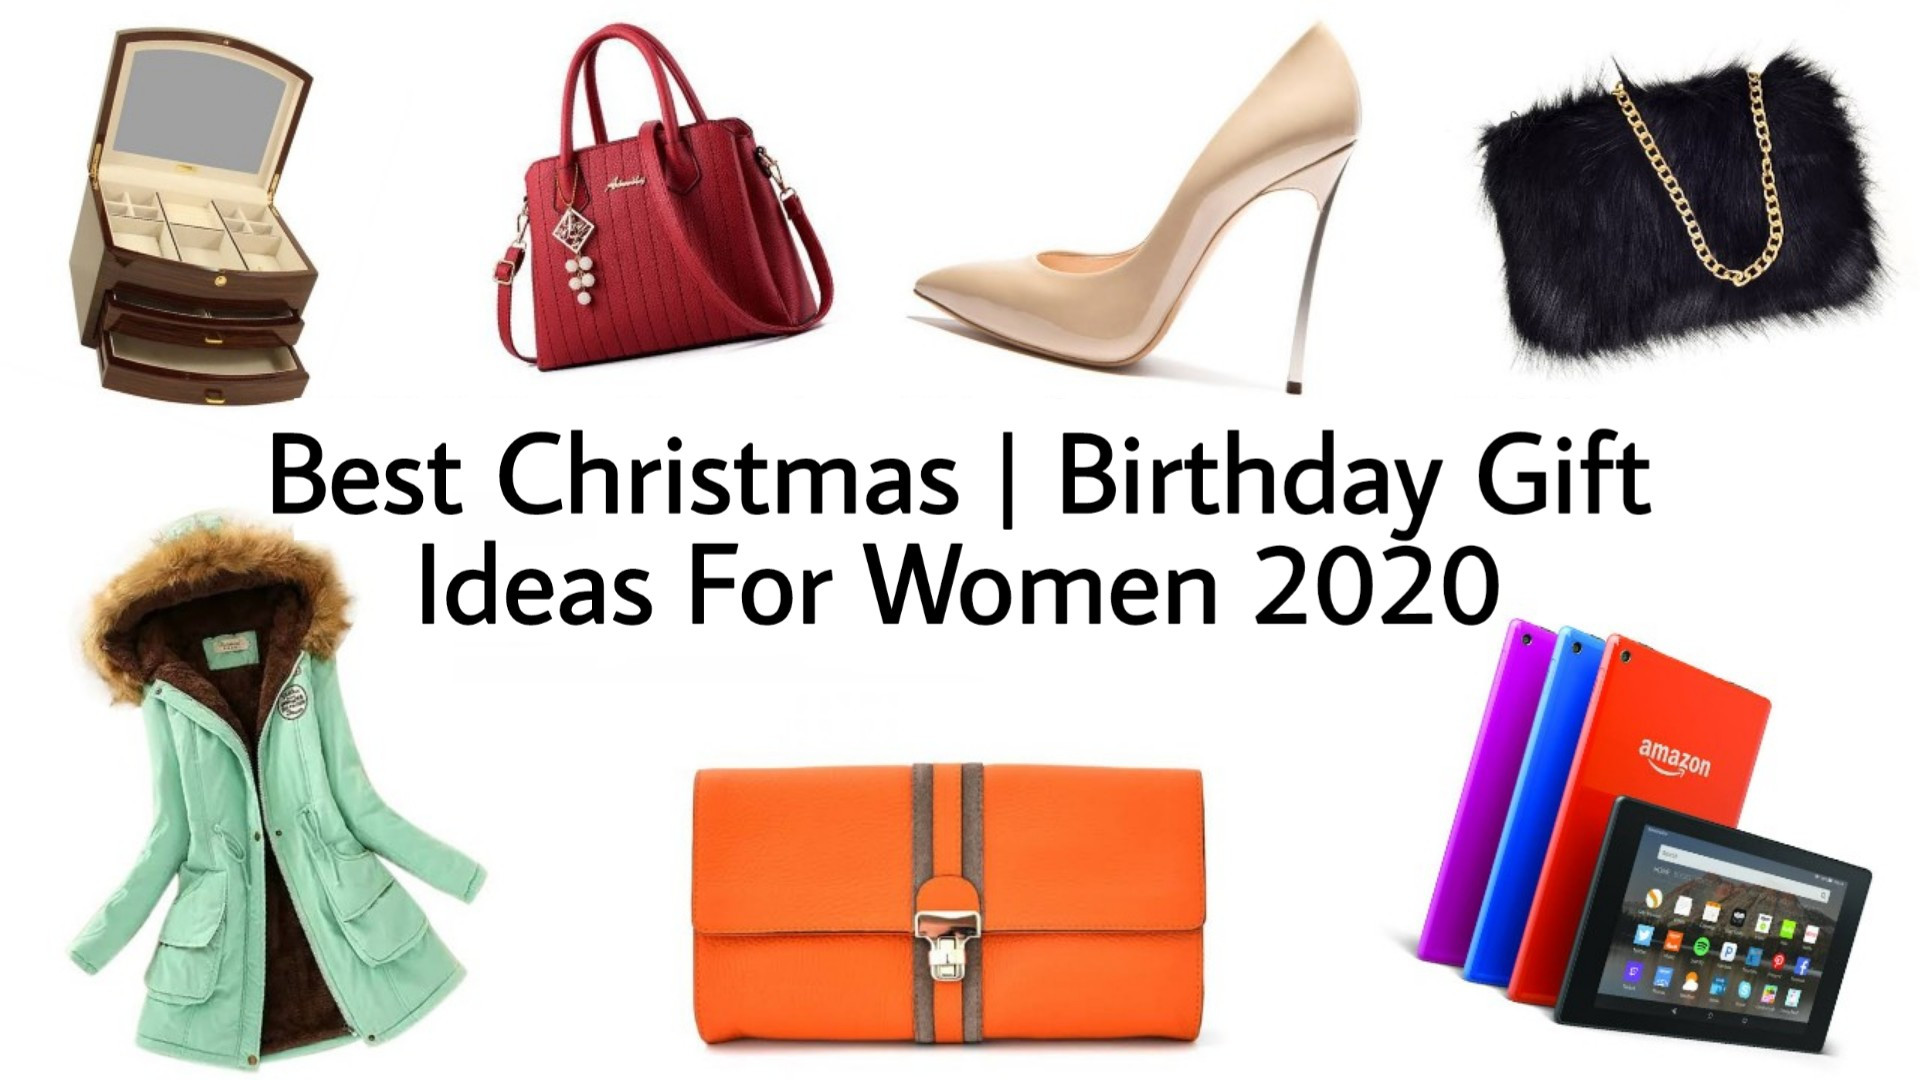 Gift Ideas Christmas 2020
 Best Christmas Gifts for Women 2020